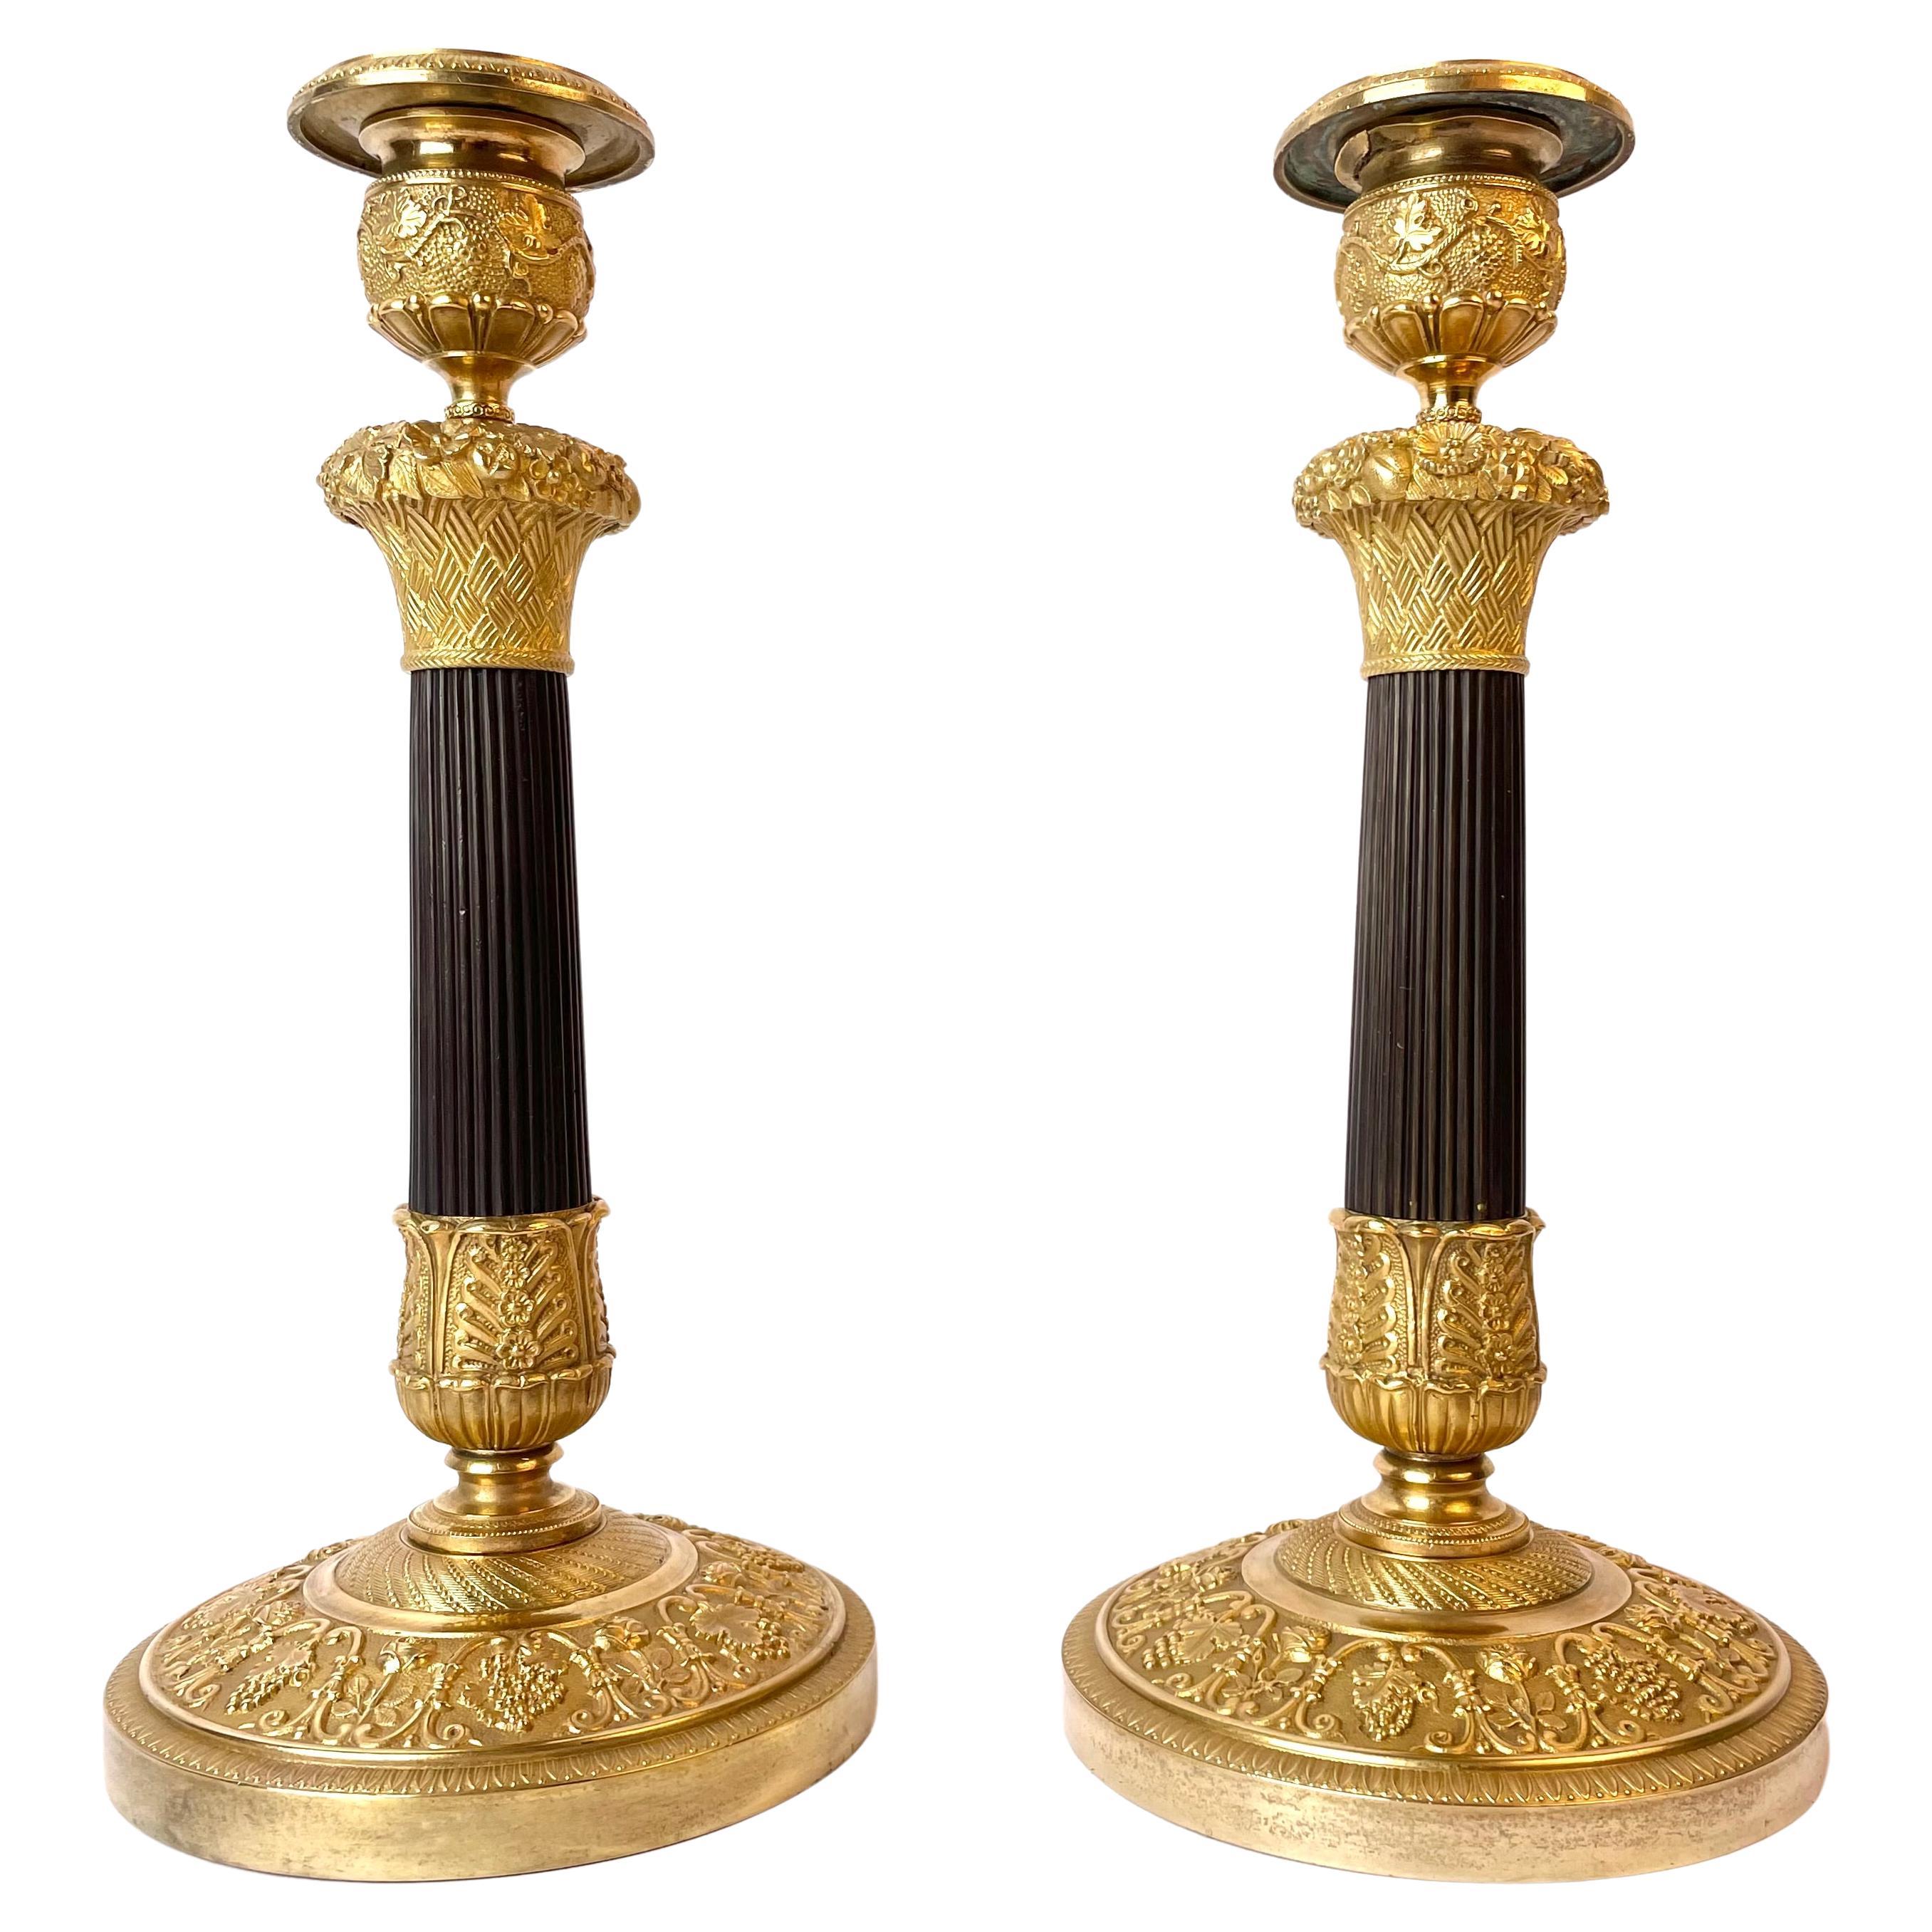 Beautiful Pair of French Empire Gilt and Dark Patinated Bronze Candlesticks